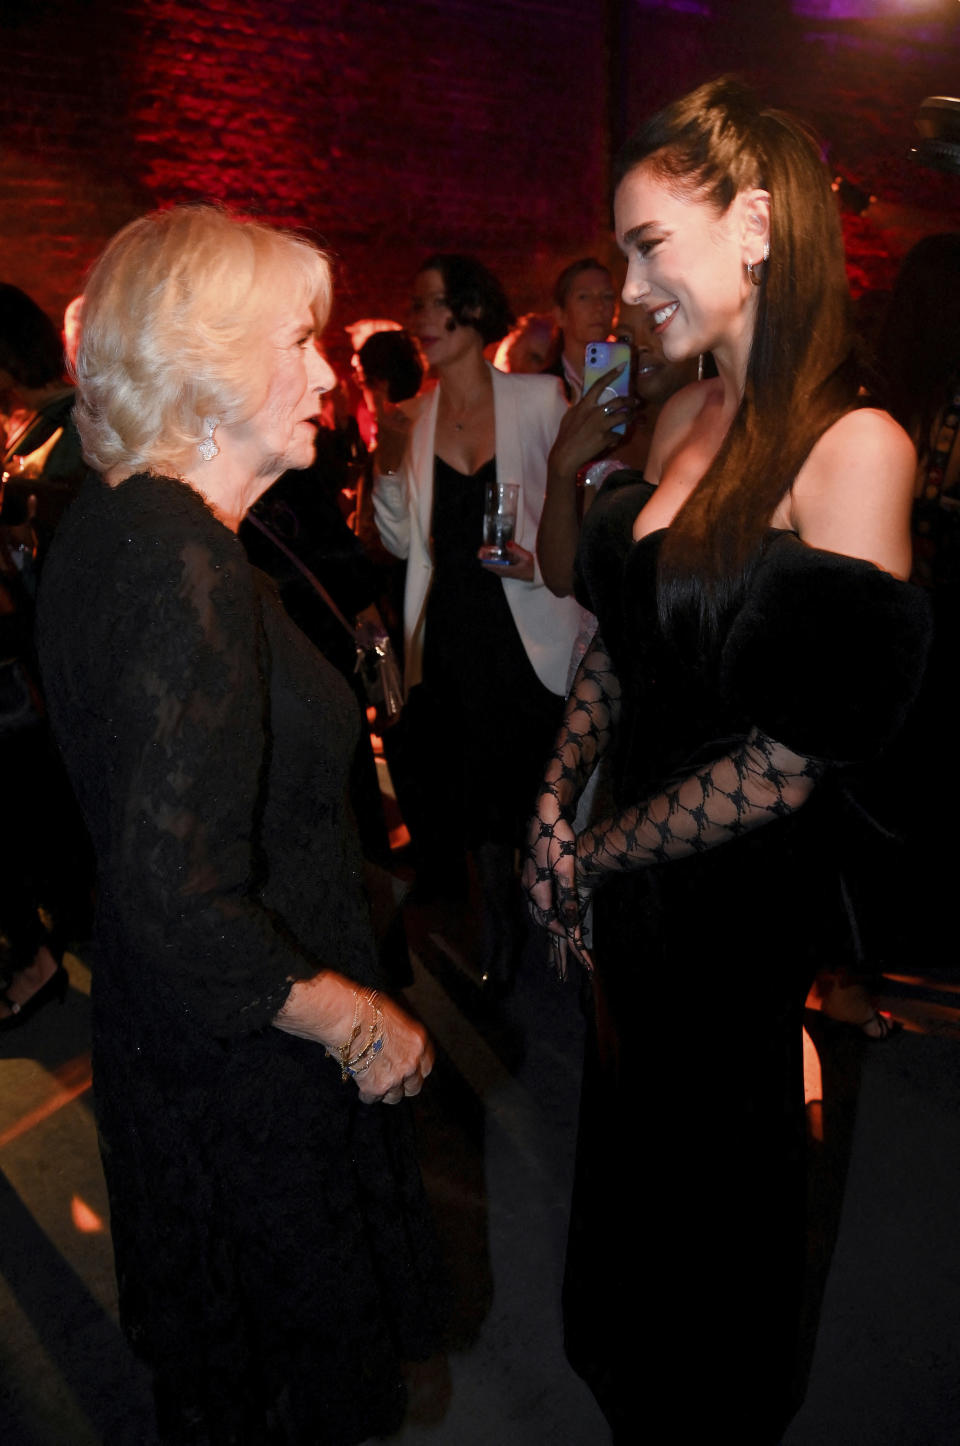 Britain's Camilla, Queen Consort, talks with Dua Lipa, right, during the Booker Prize at the Roundhouse in London, Monday Oct. 17, 2022. (Toby Melville/Pool via AP)